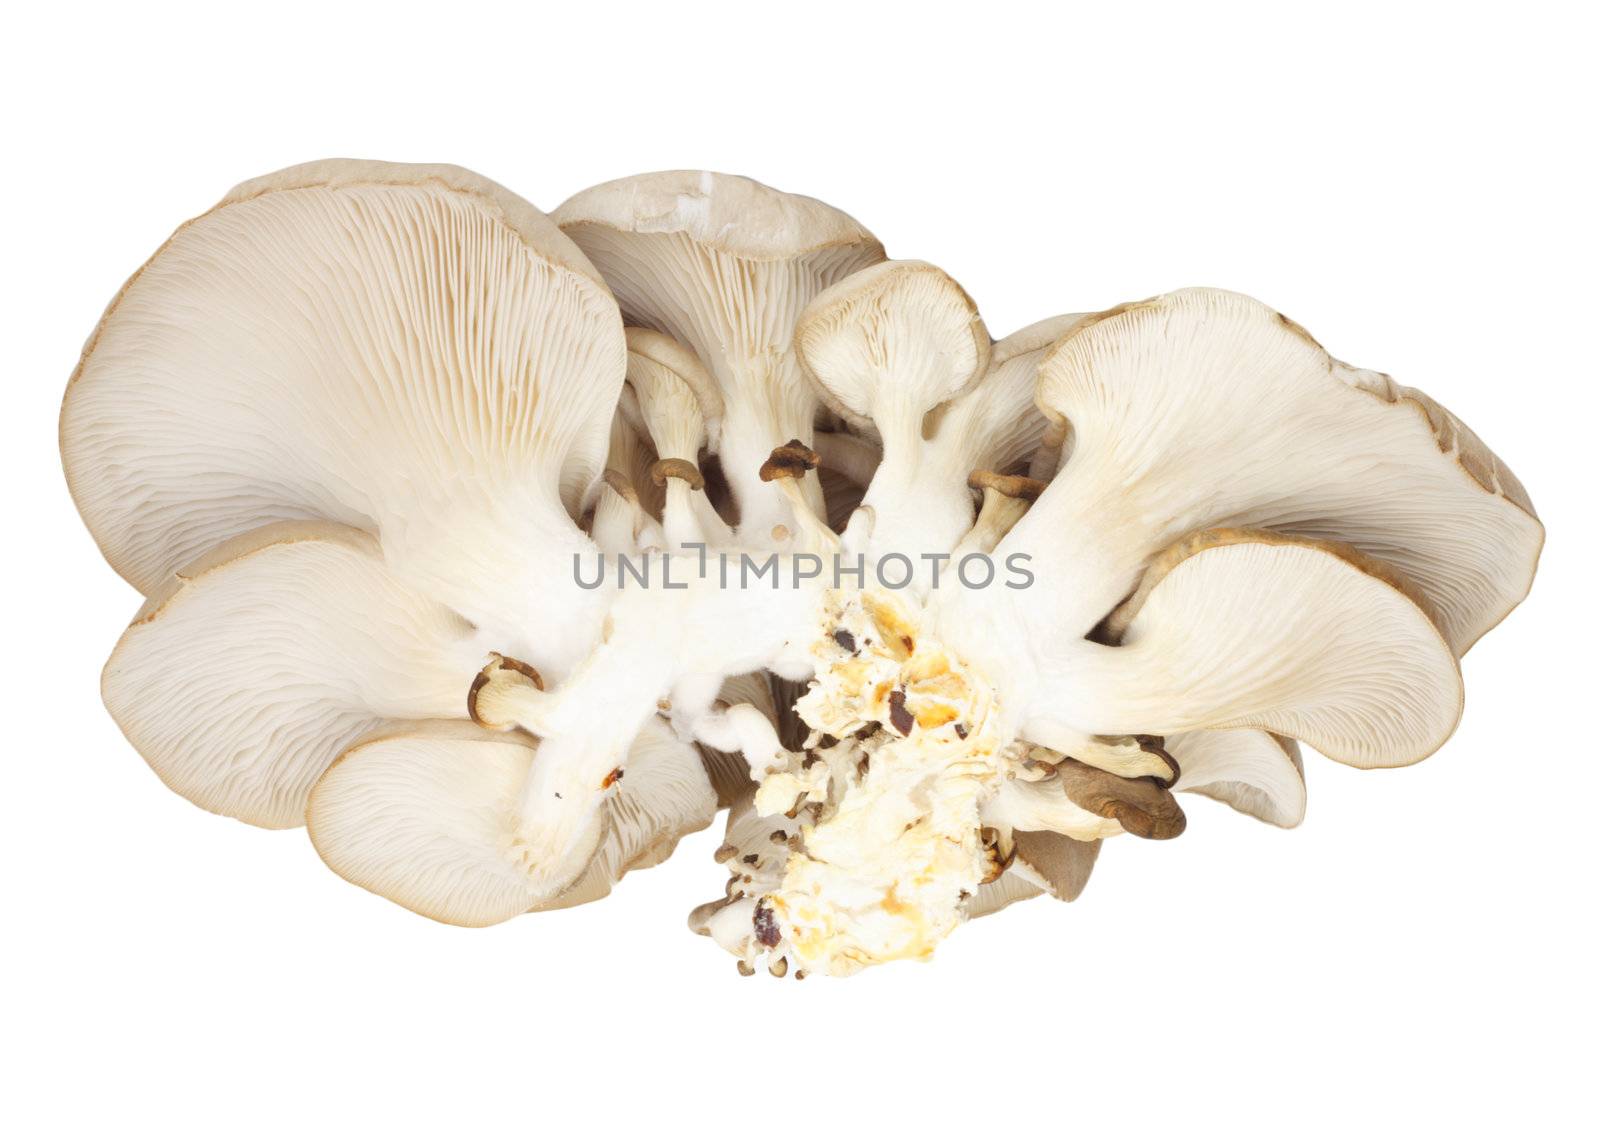 Oyster mushrooms on a white background by schankz